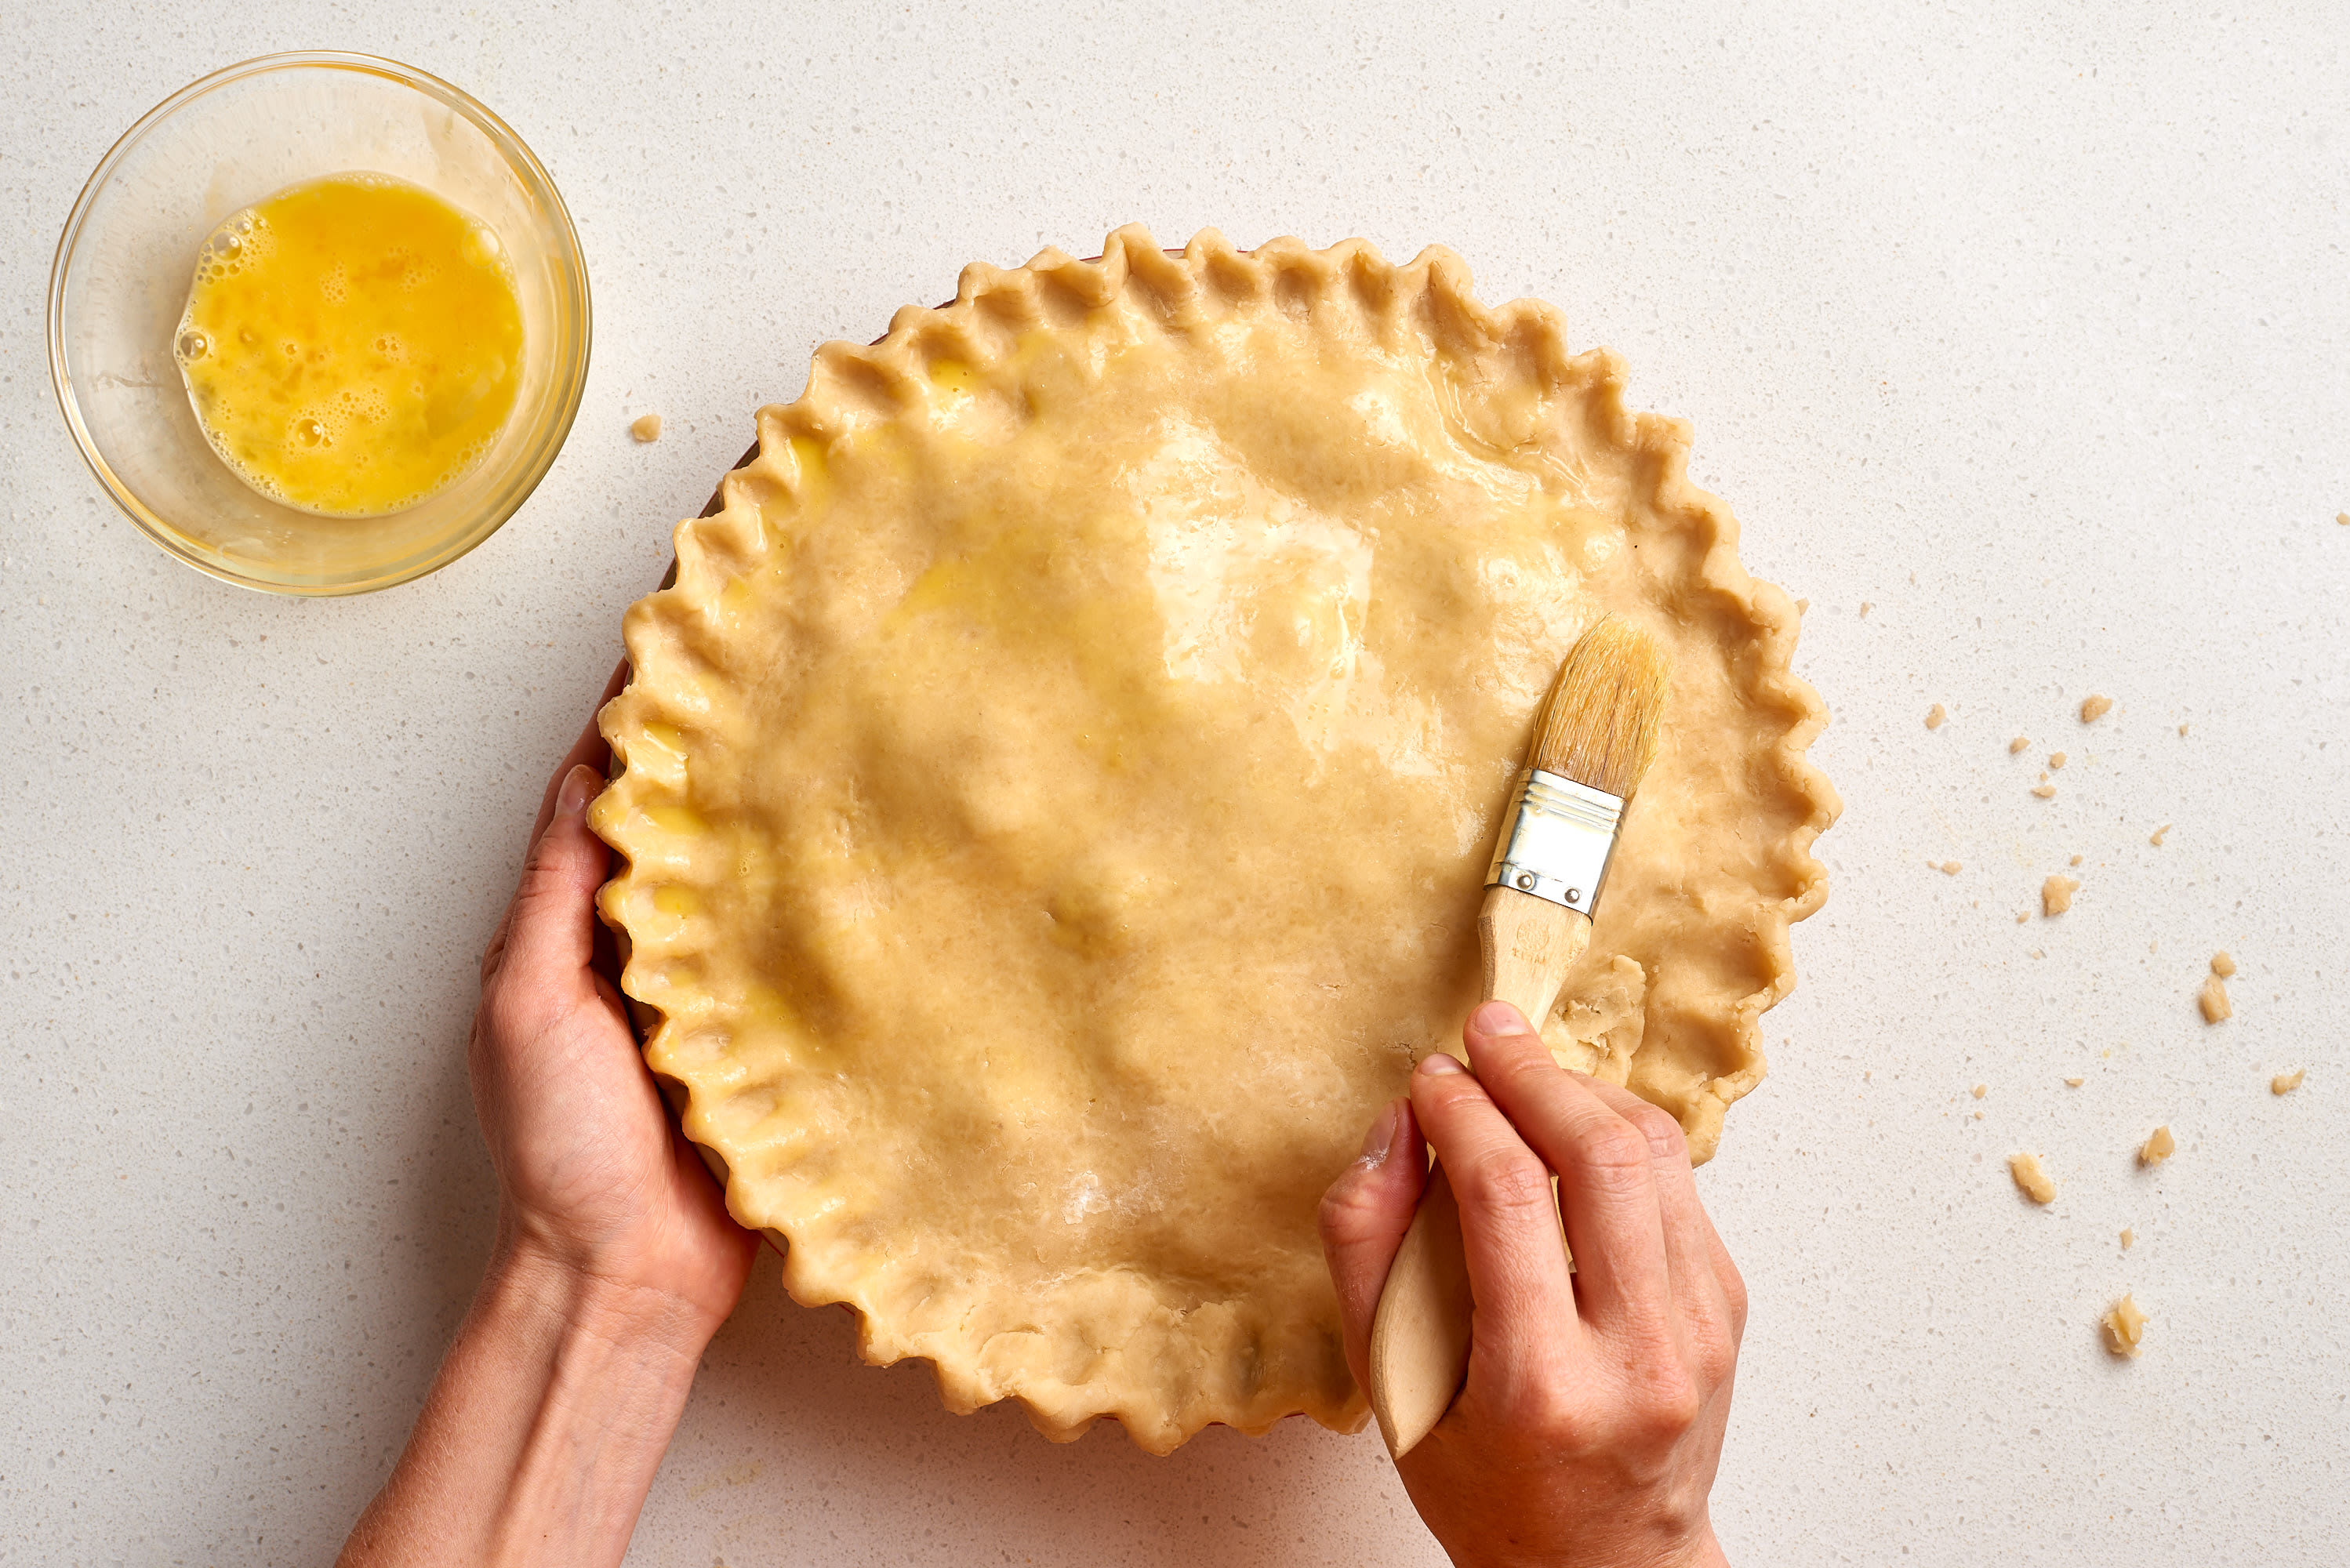 10 Baking Tools for Perfect Pies